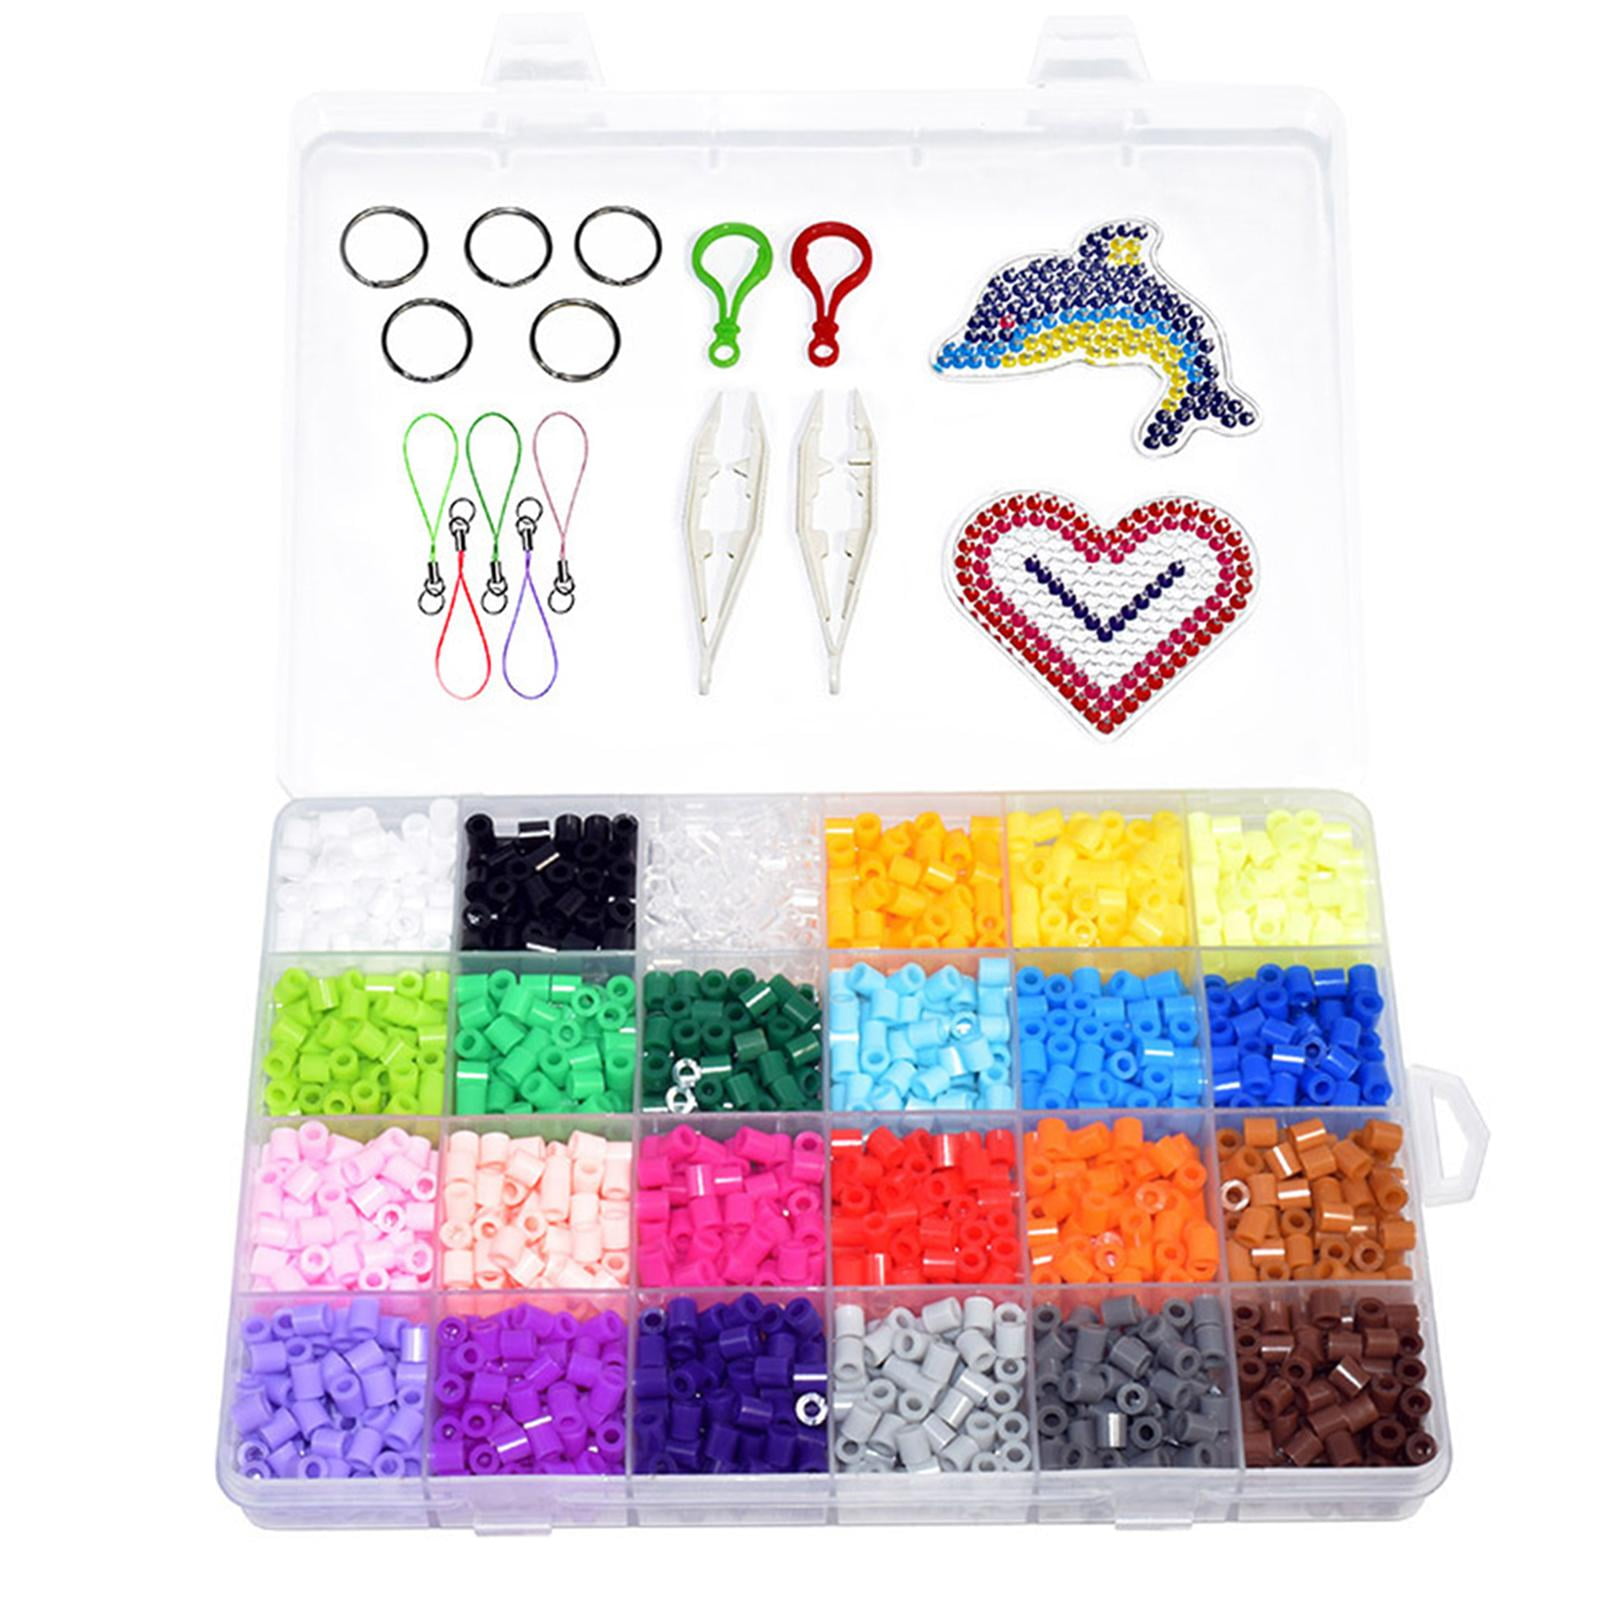 Beads Perler Fuse Pegboard Bead BeadsPegboards Kit Water Sets Pearler  Crafts Kids Melting Melty Board Geometric Boards